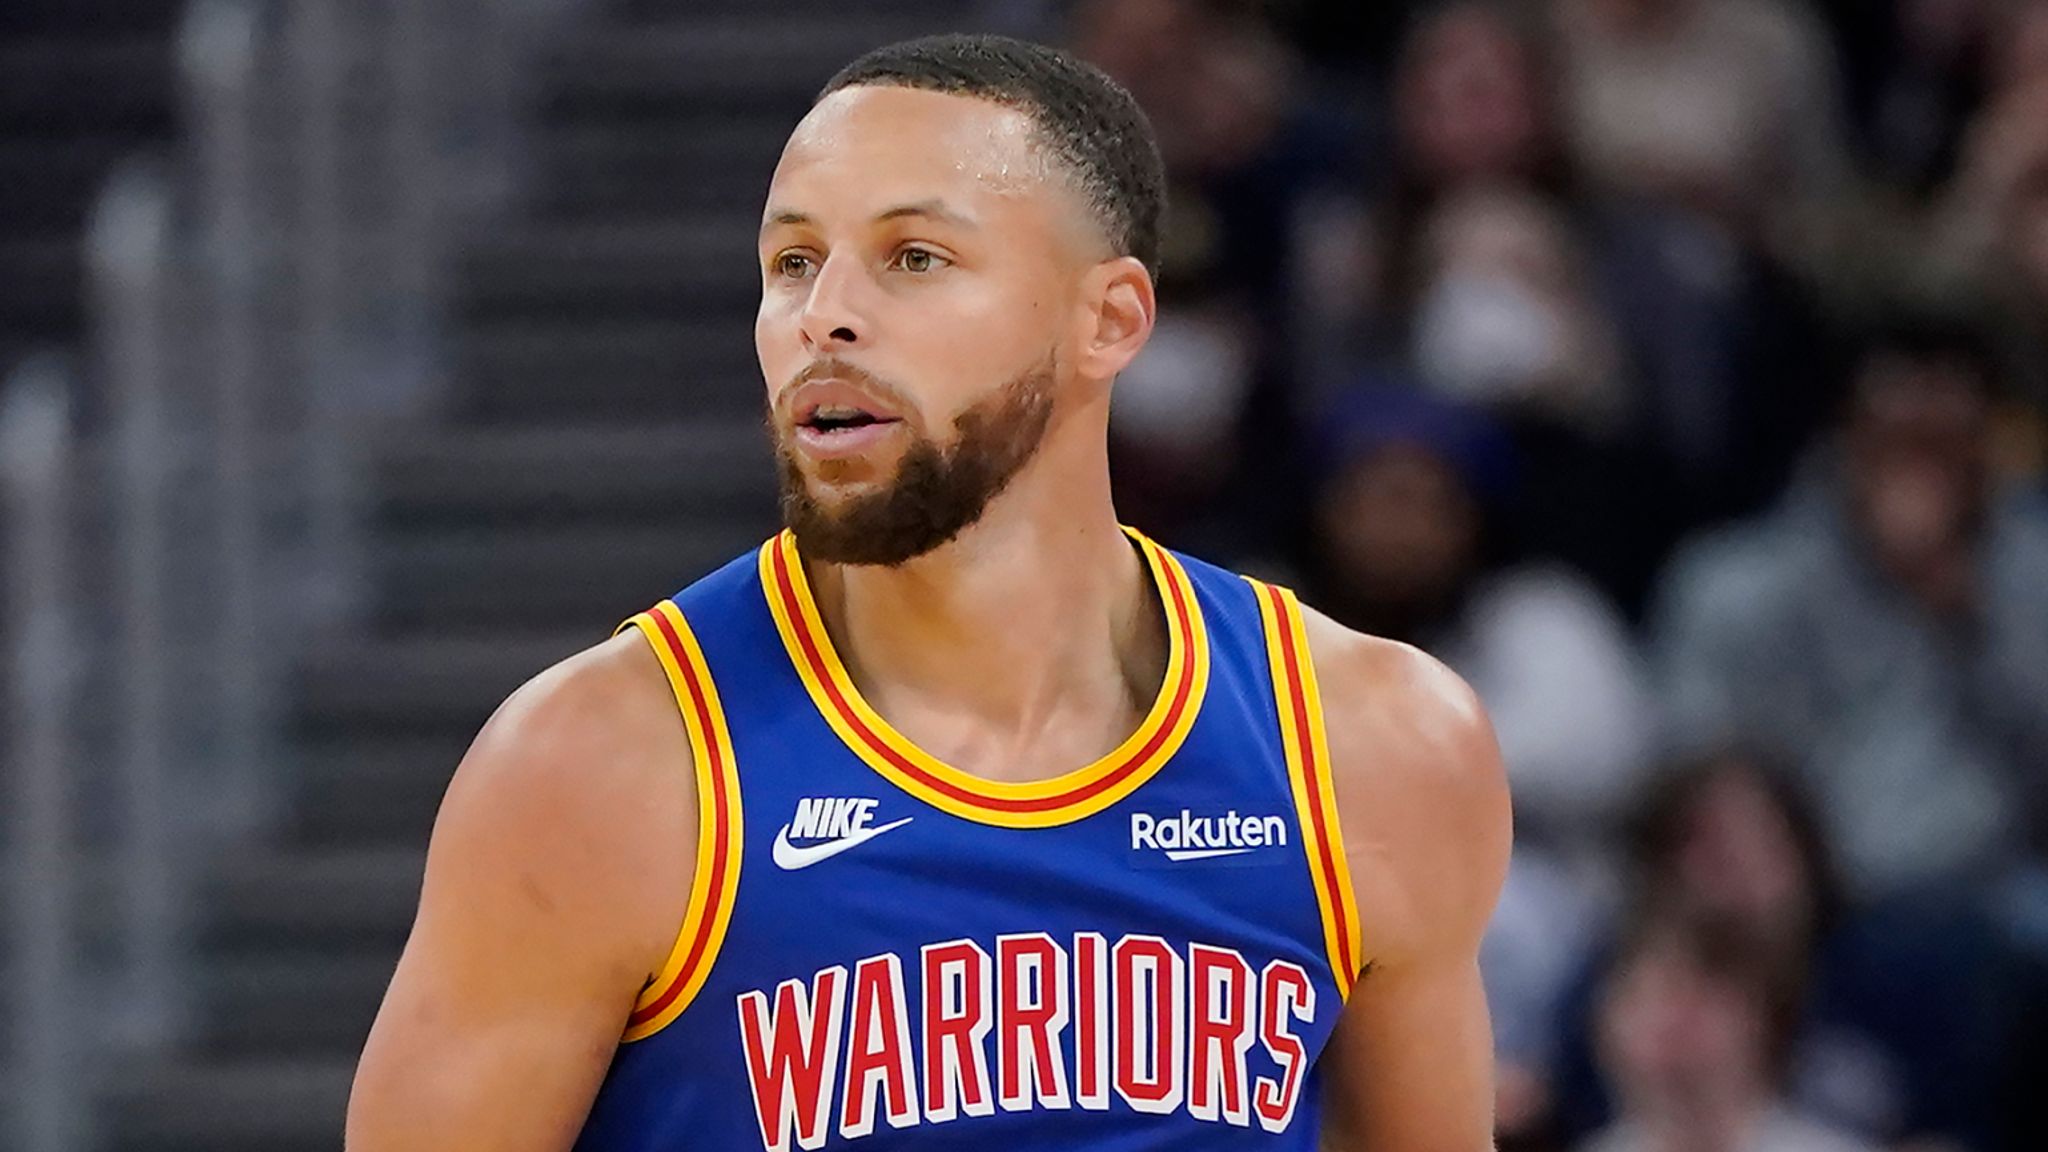 Stephen Curry is back for the Warriors, so it's just a matter of